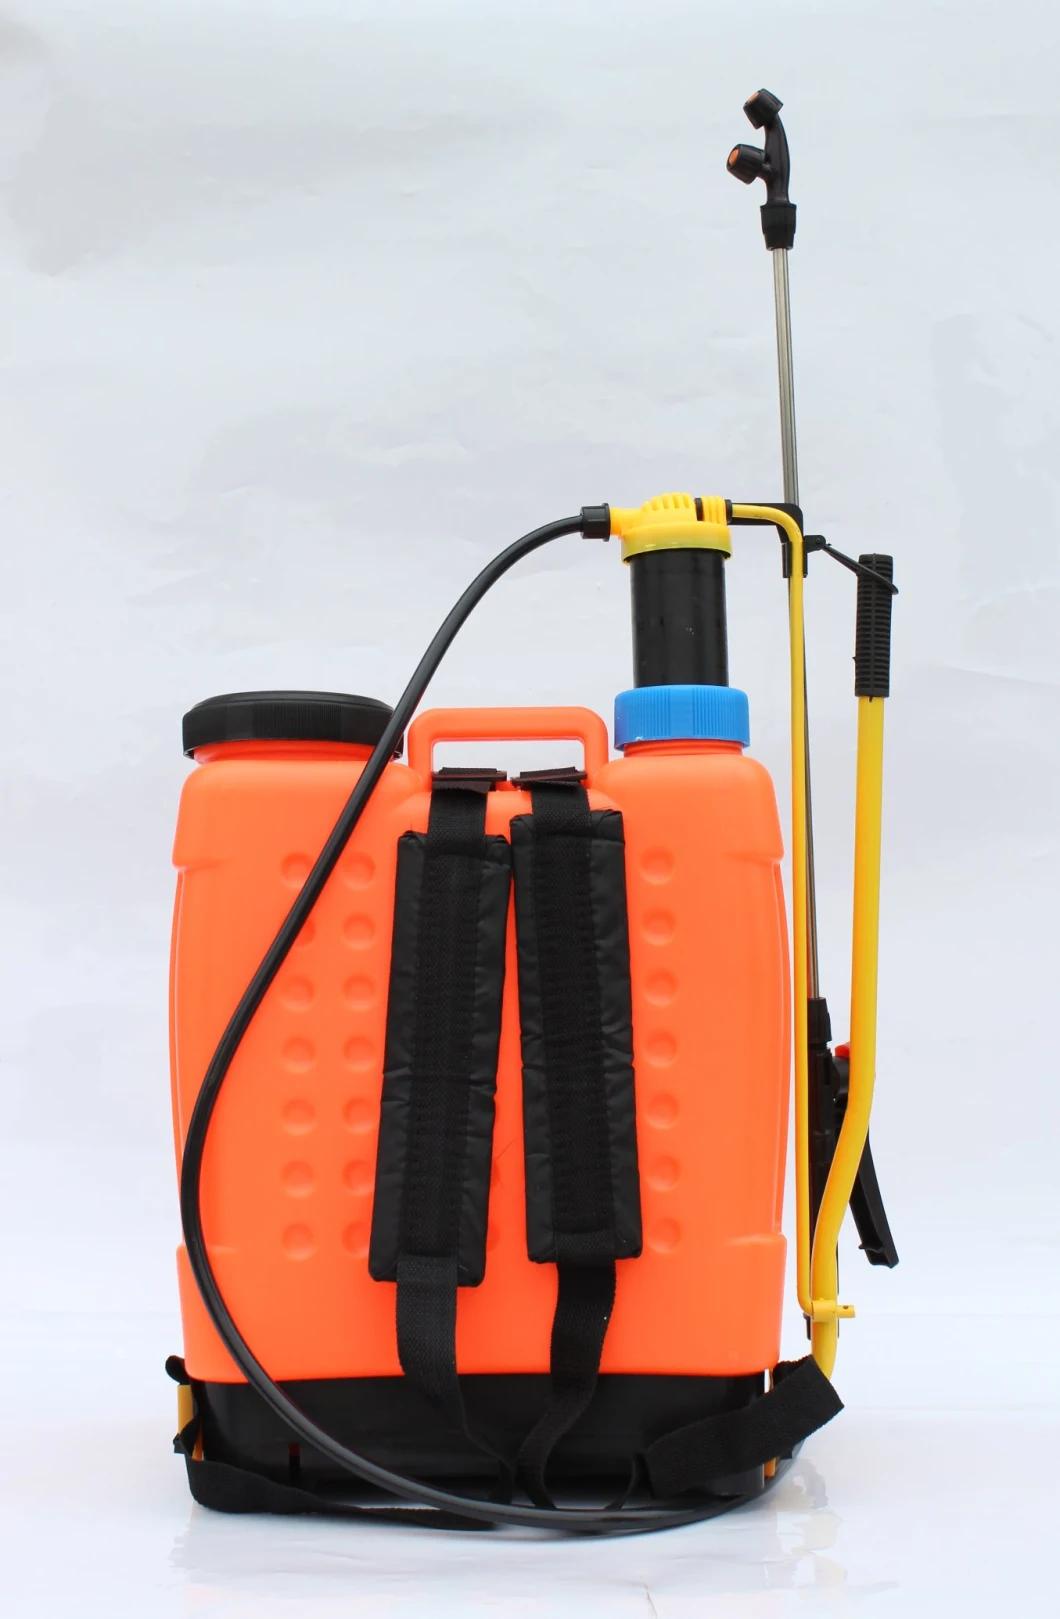 Manual Operated High Pressure Water Sprayer 20L Garden Tools